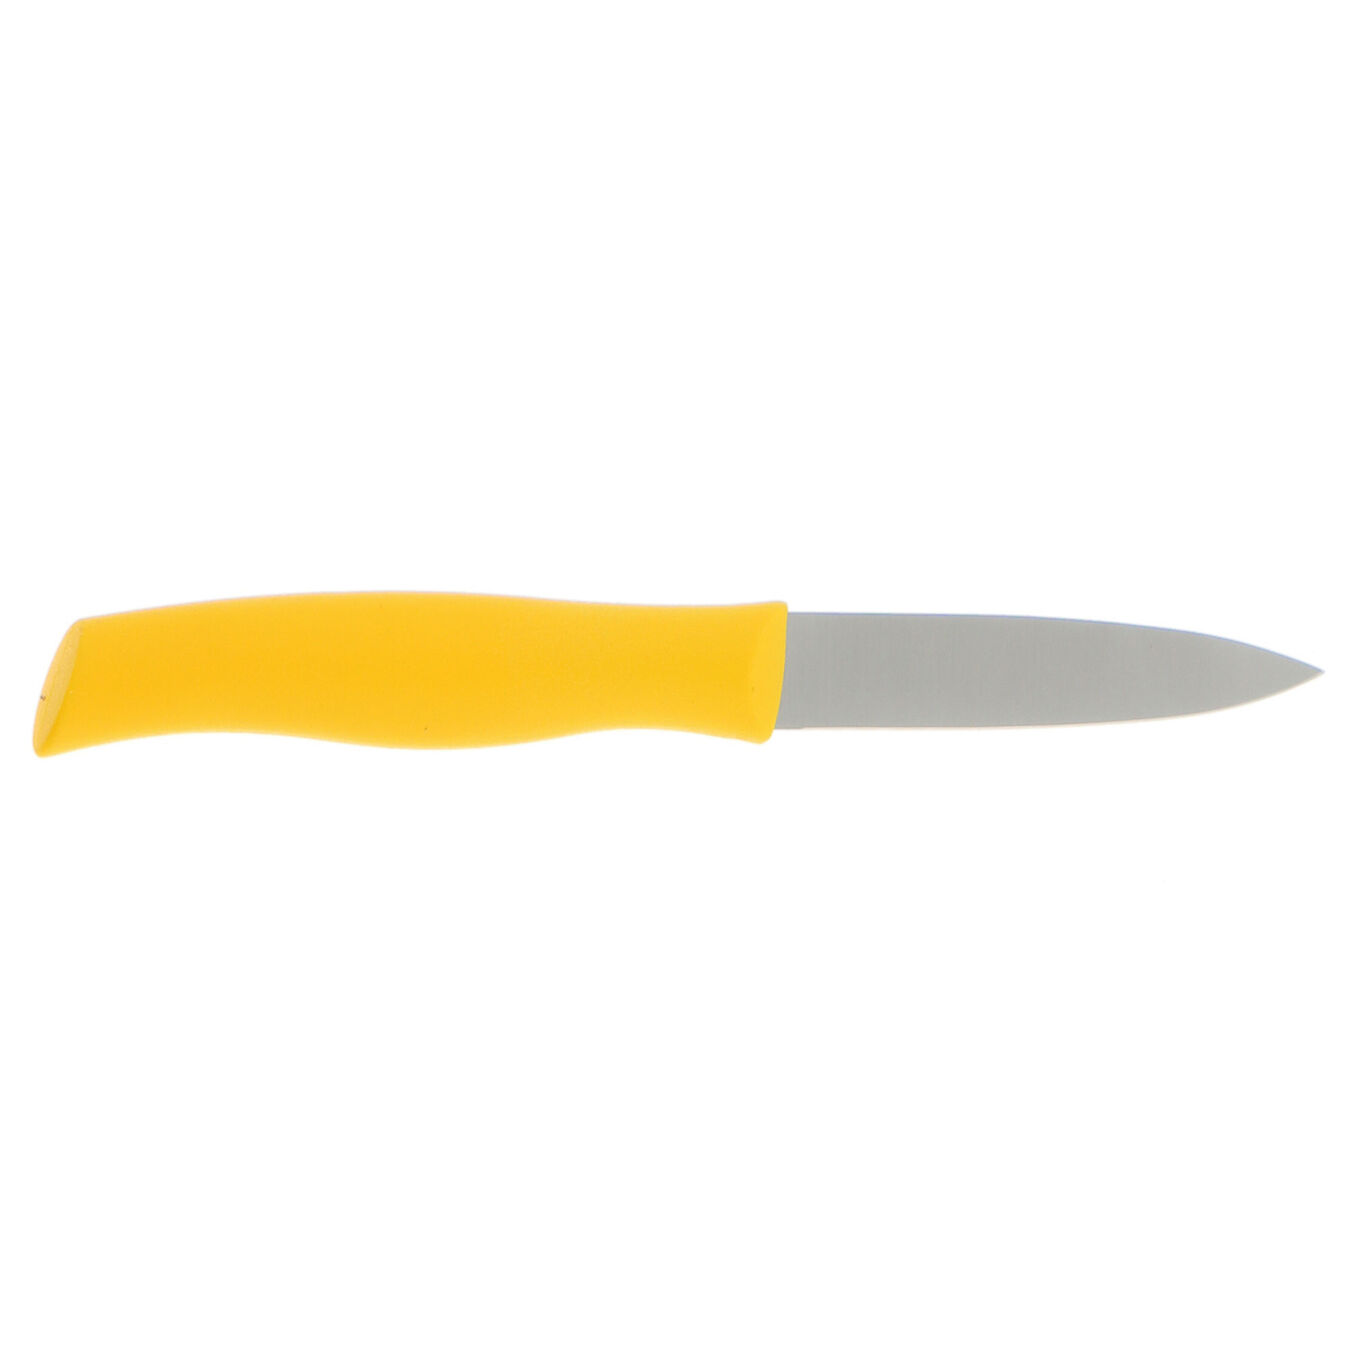 3.5-inch, Paring Knife Yellow ,,large 2